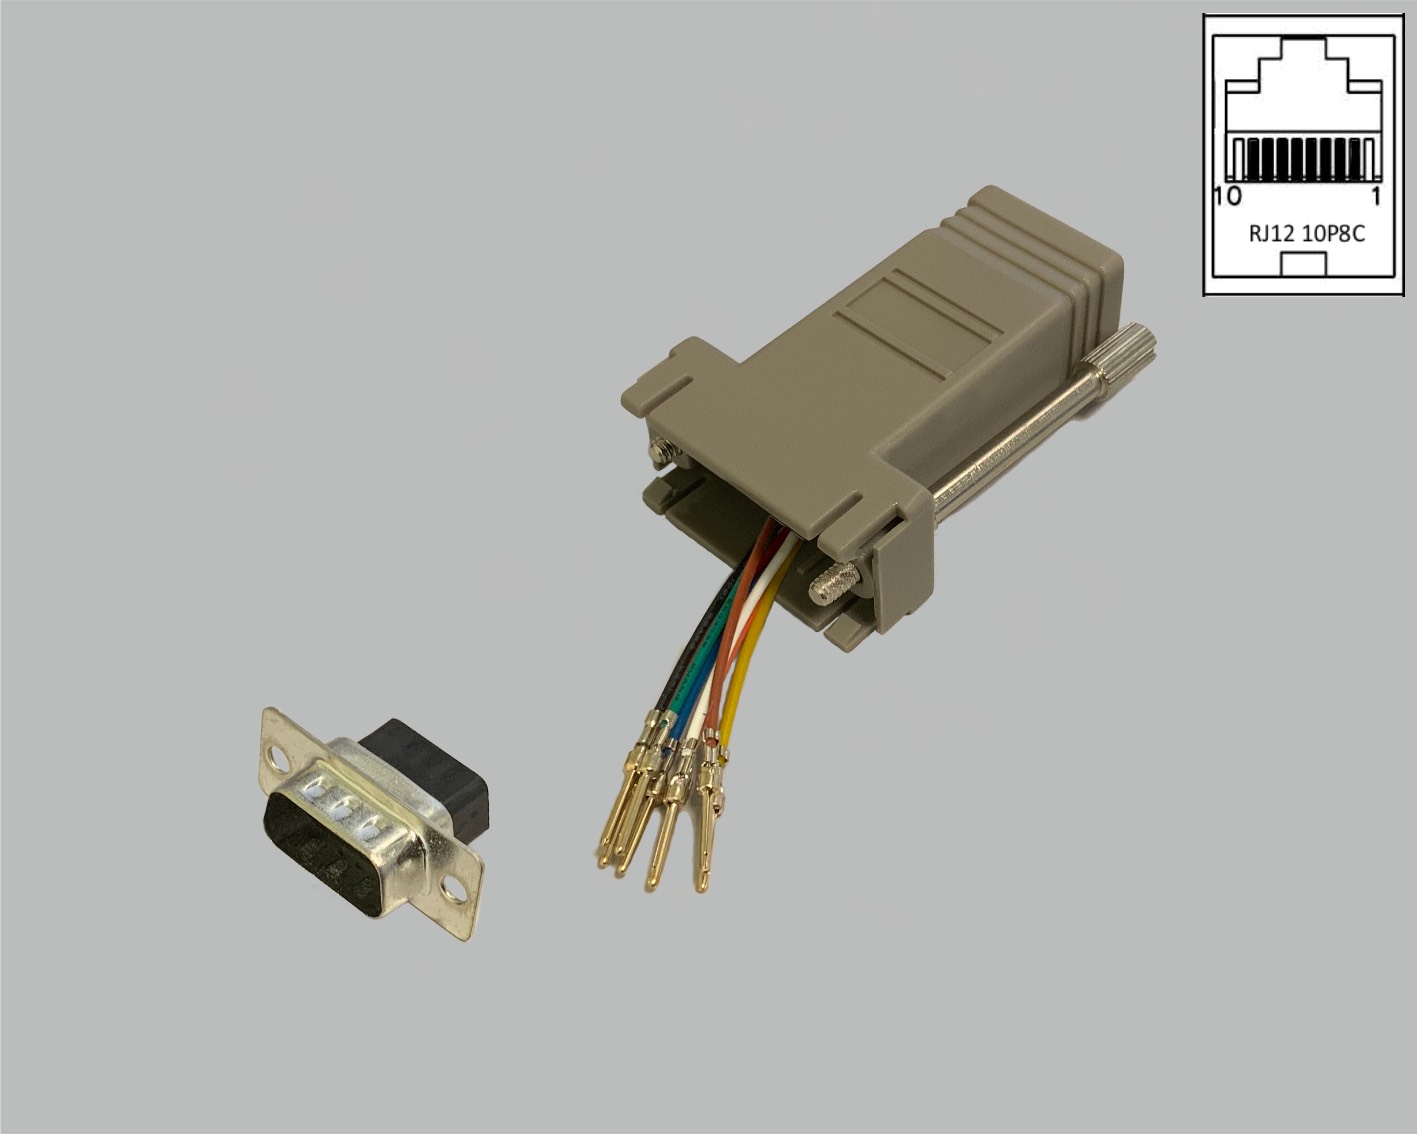 D-Sub/RJ adapter, freely configurable, D-Sub male connector 9-pole to RJ45 (10P8C) female connector, grey